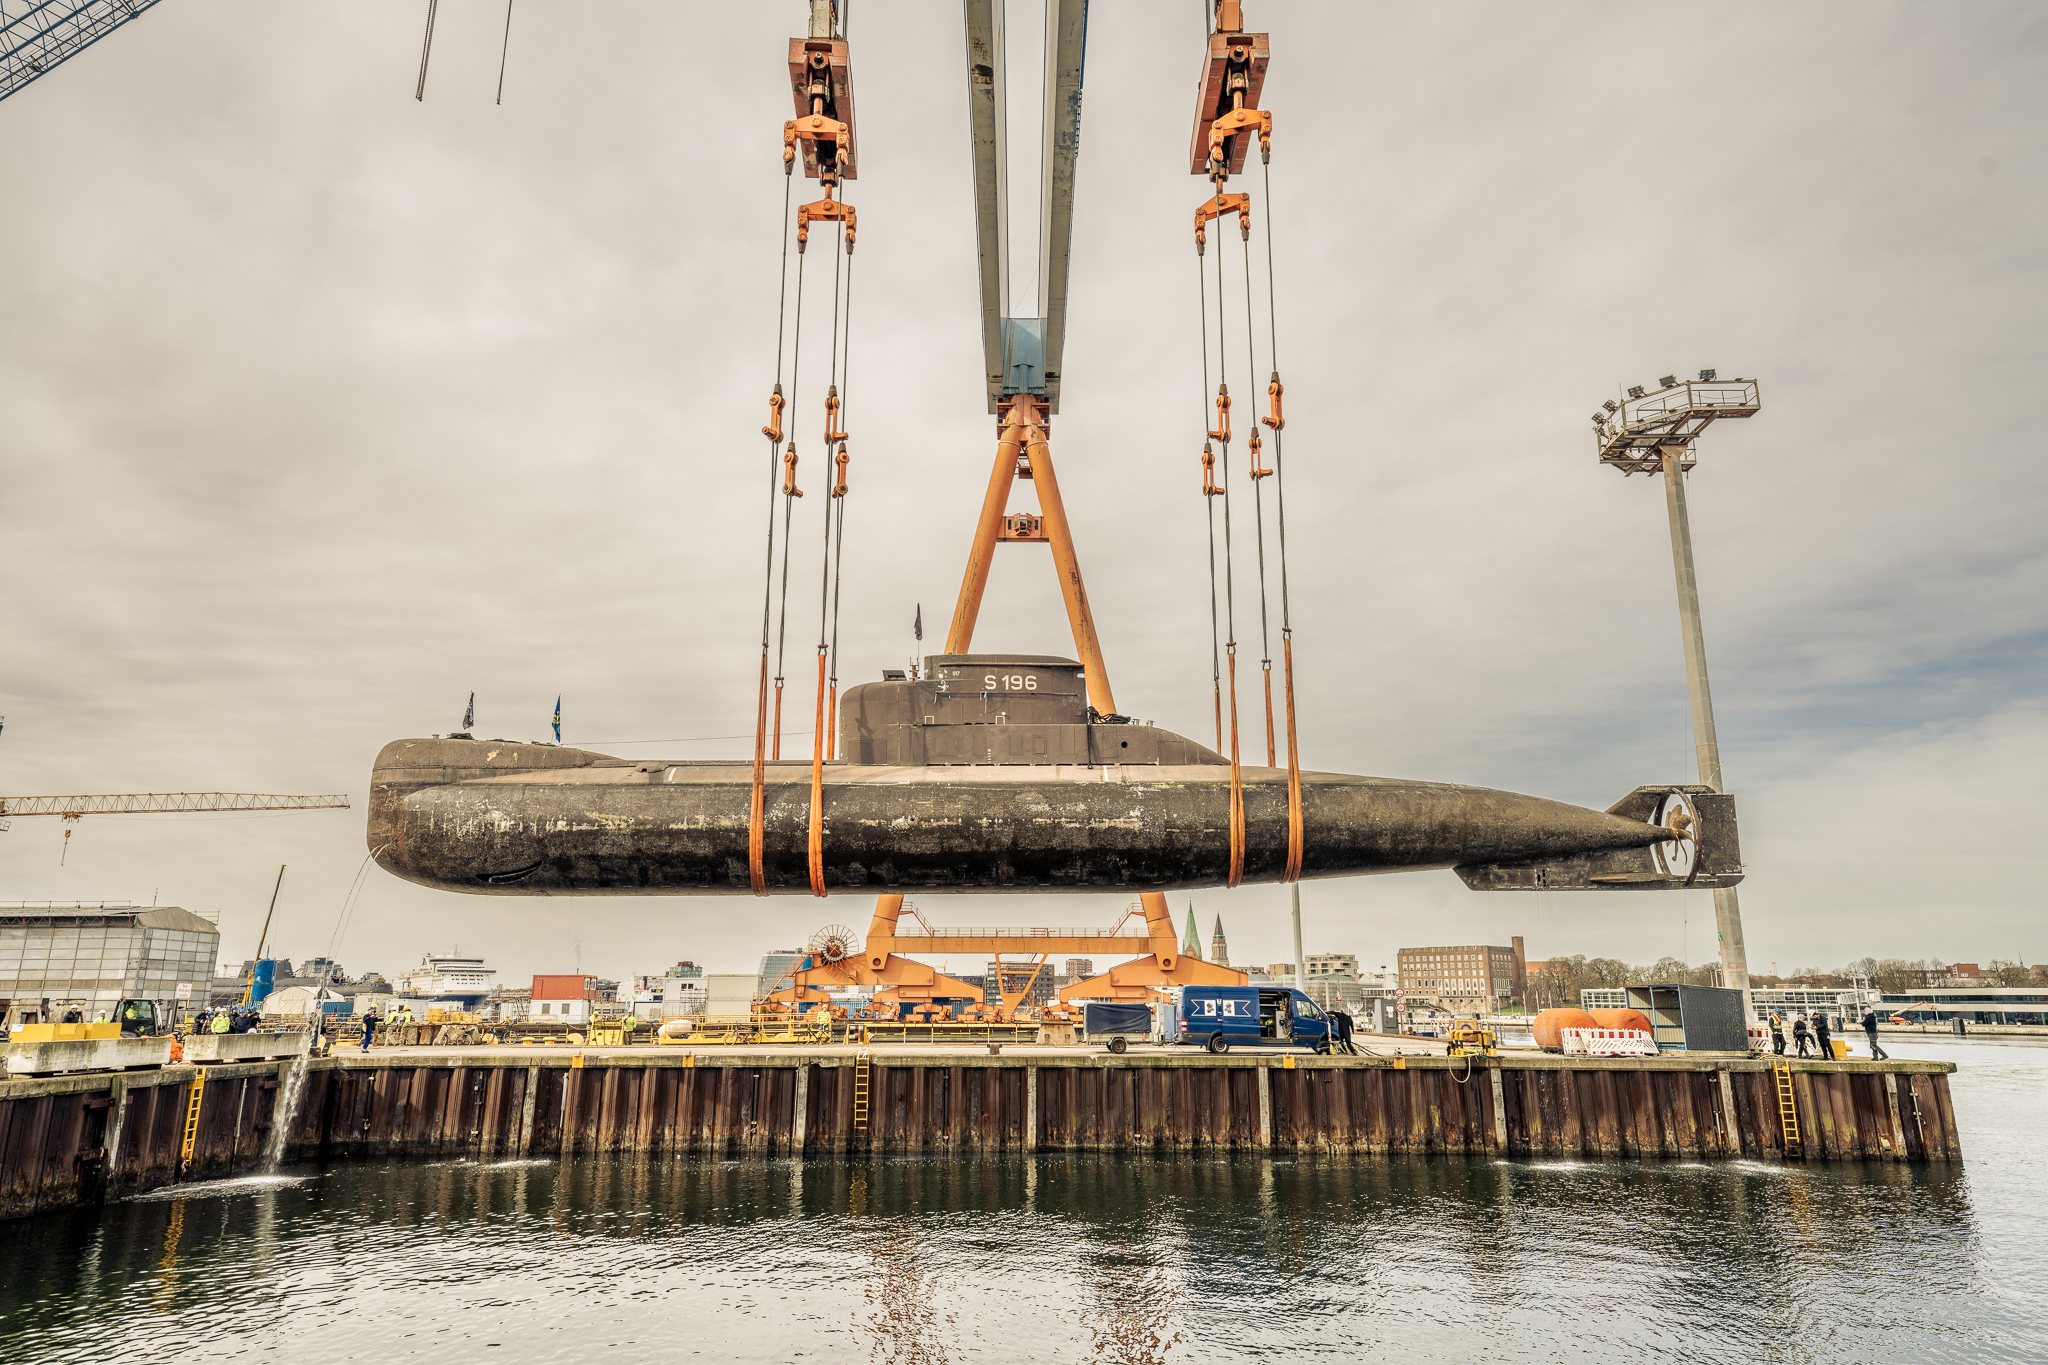 Hours later, it was lifted into dry dock by a mighty 900-tonne gantry crane in the German Naval Yards Kiel's branch harbour.